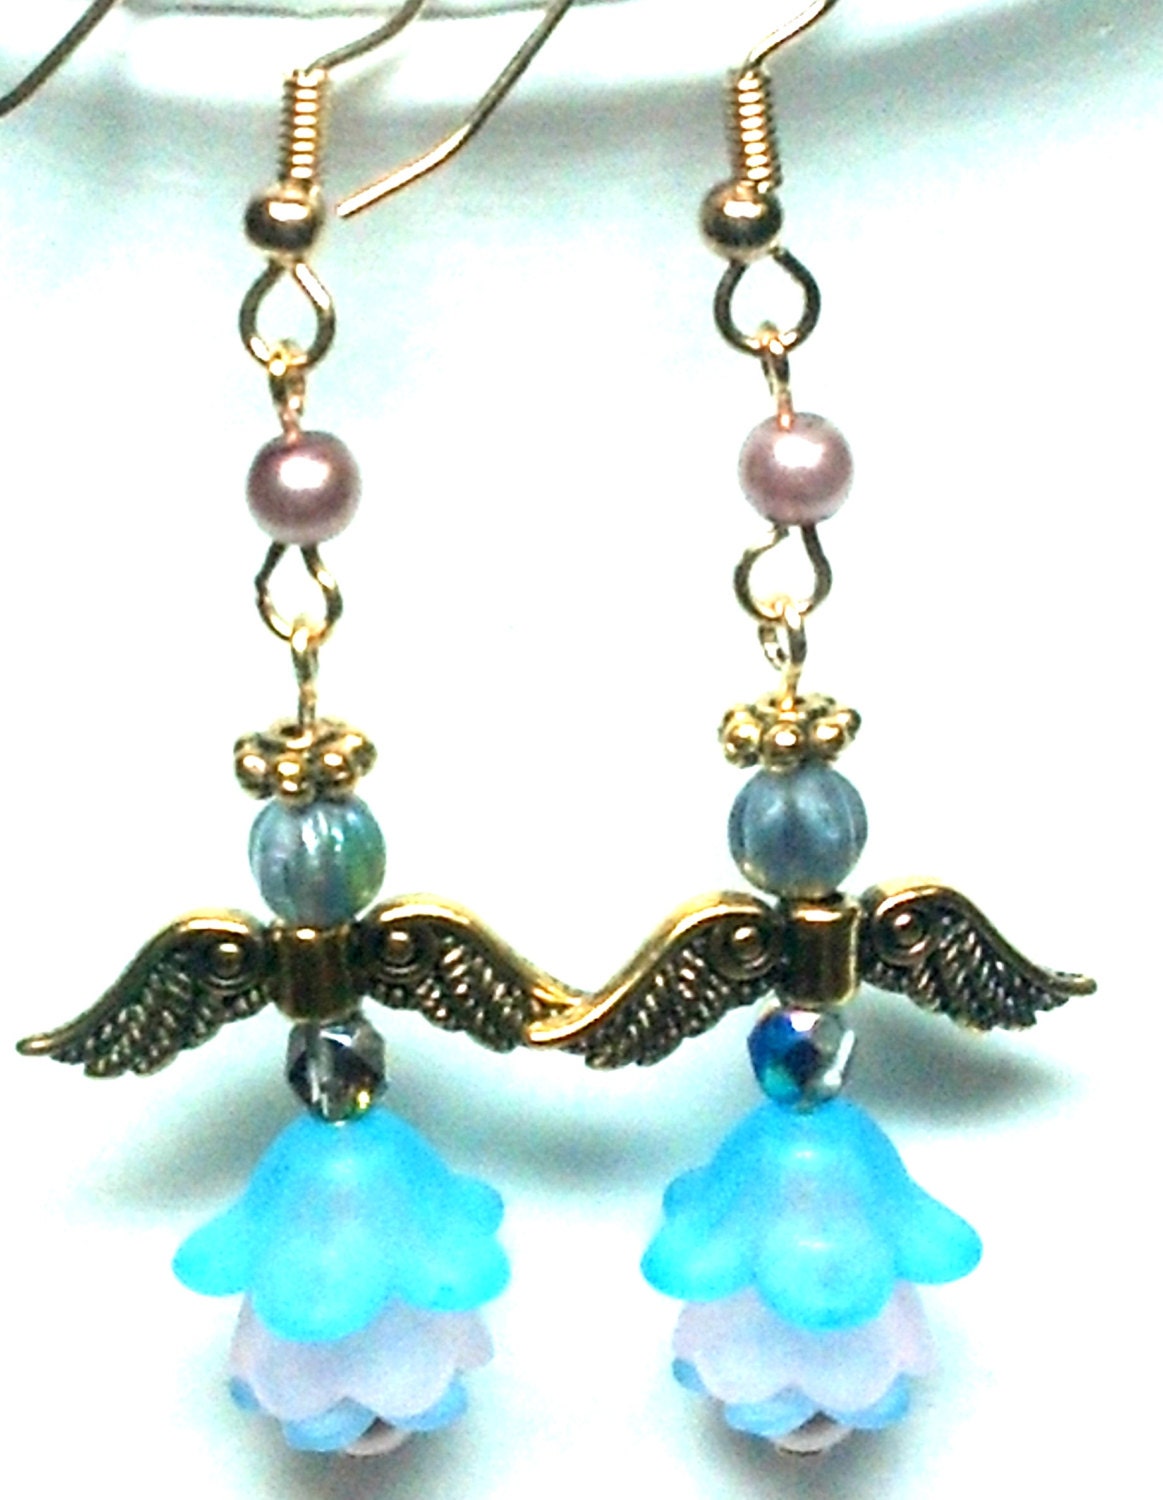 Blue and Pink Flower Angel Earrings, Jewelry, Etsy, Handmade, Handcrafted, Angels, Earrings, Gift for her, Gift idea, Sale,